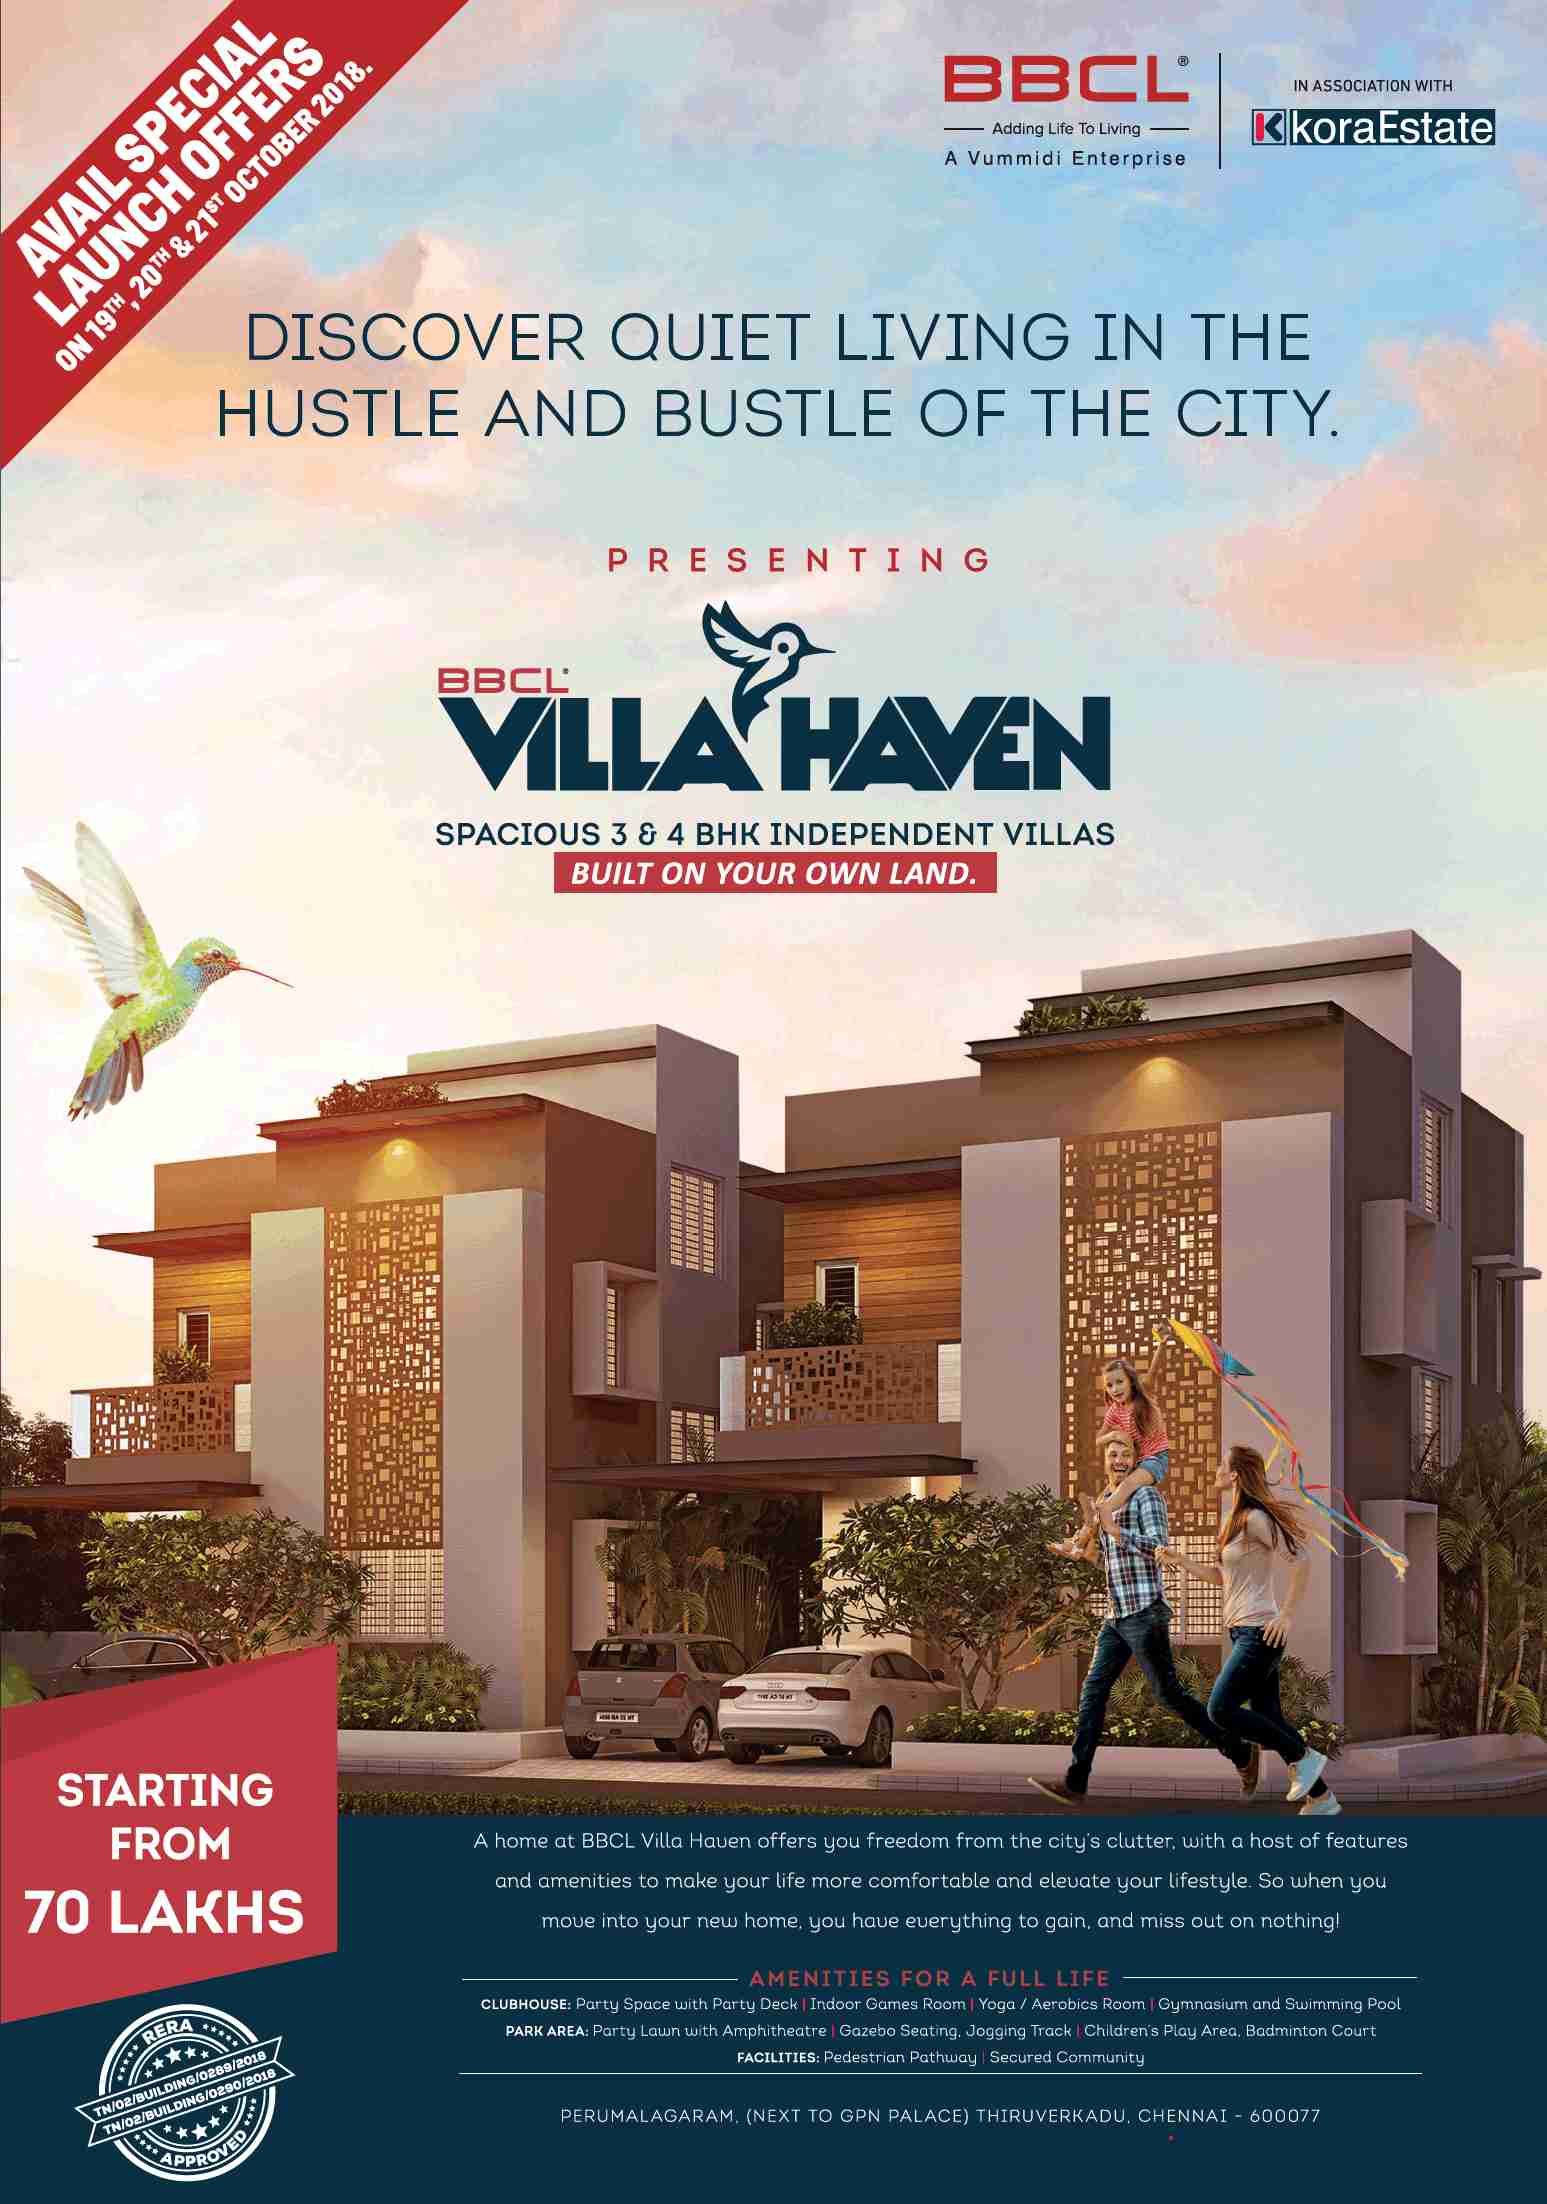 Book spacious 3 & 4 BHK independent villas @ Rs 70 Lakhs at BBCL Villa Haven in Chennai Update